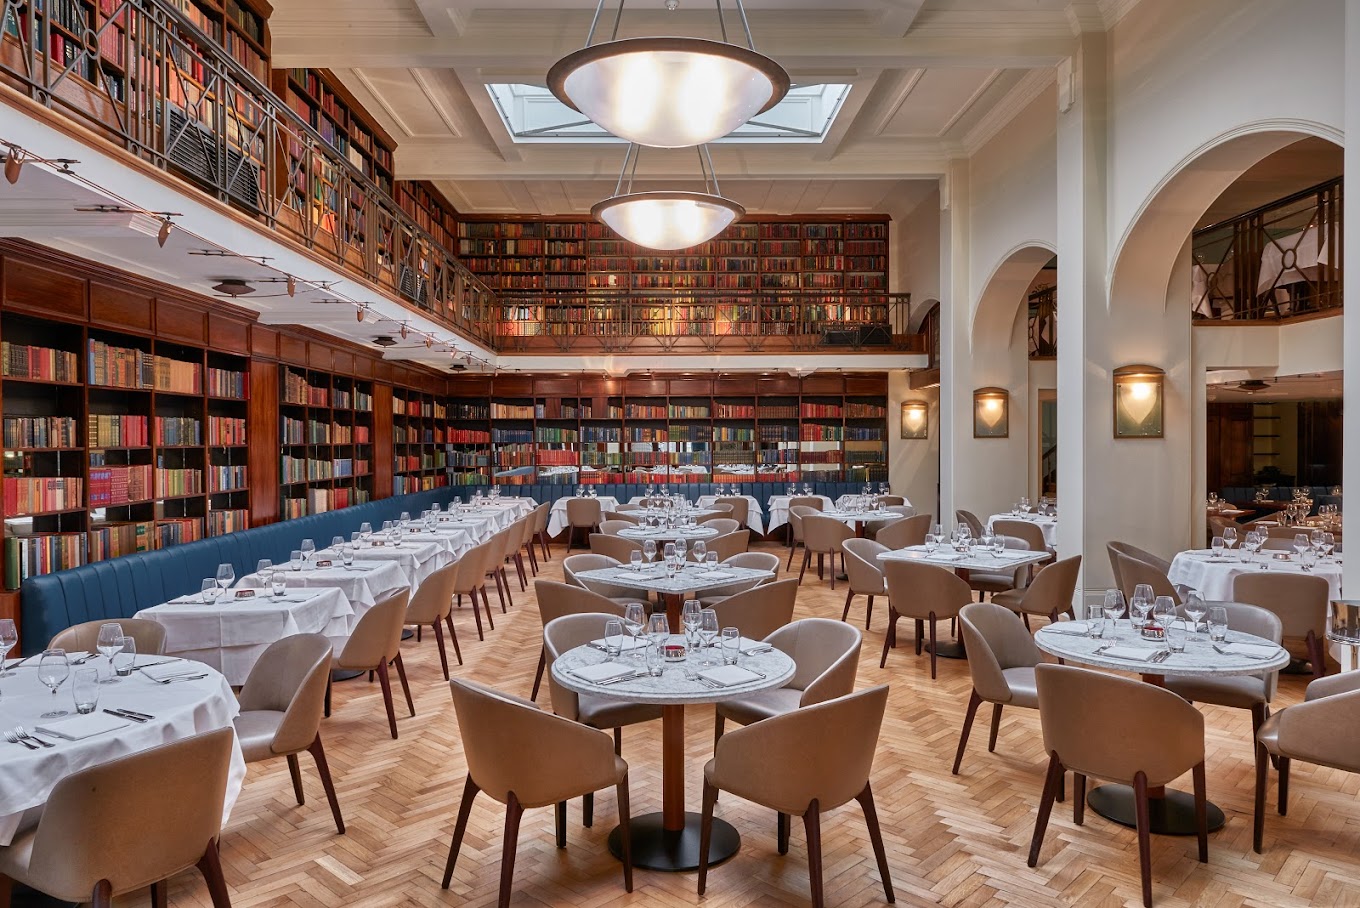 An upscale restaurant with multicoloured library shelves along the walls.